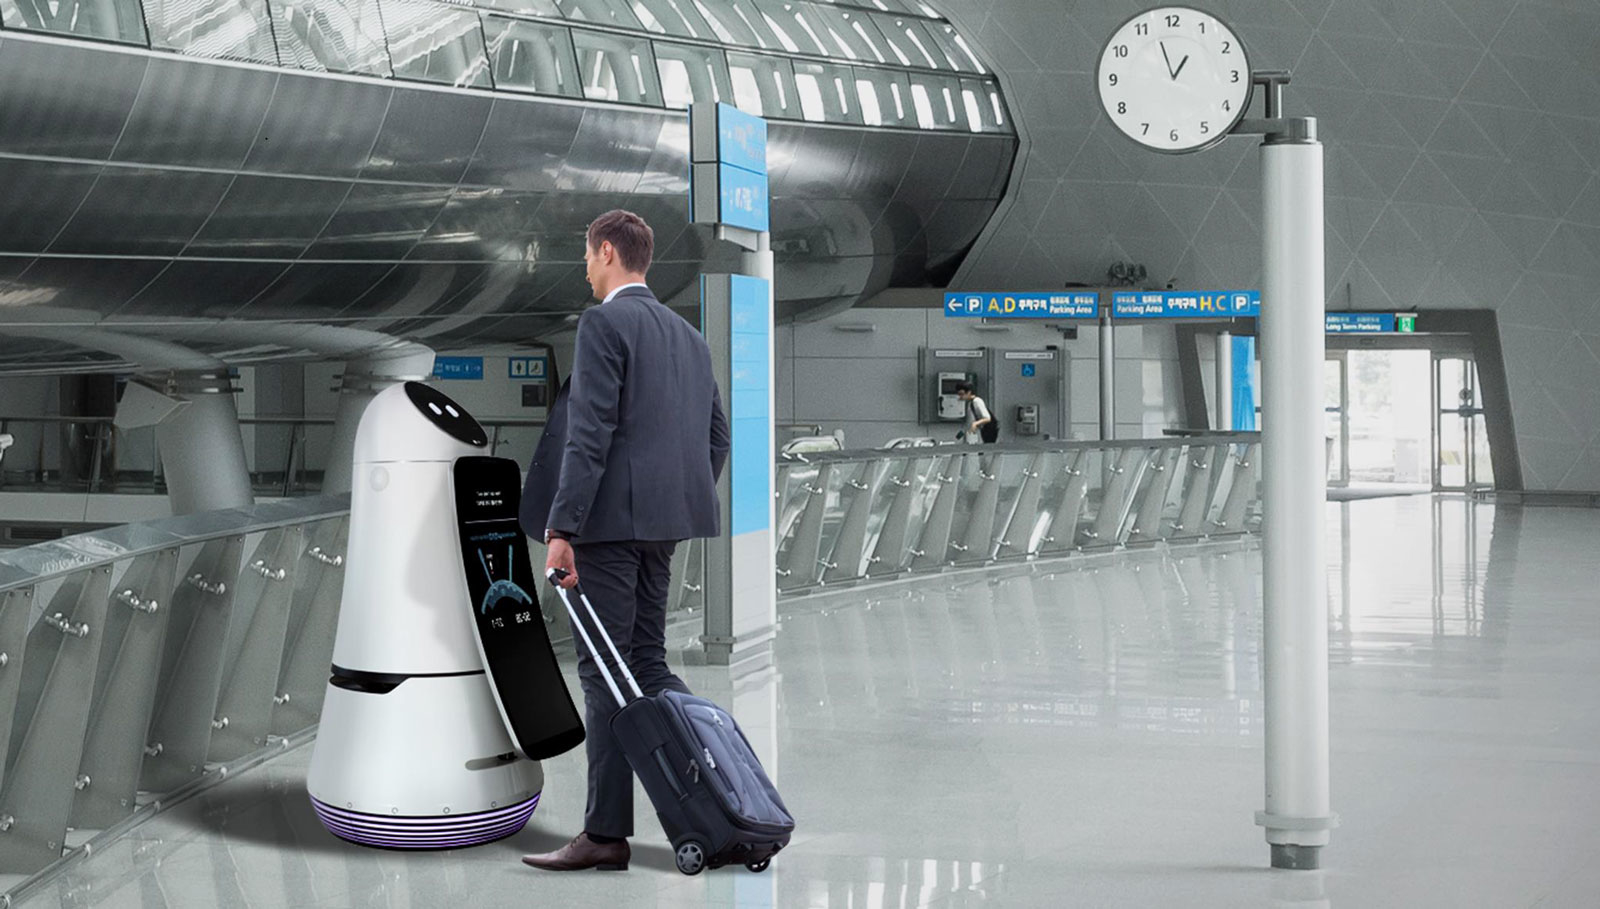 Robots to Help You at Airports in South Korea